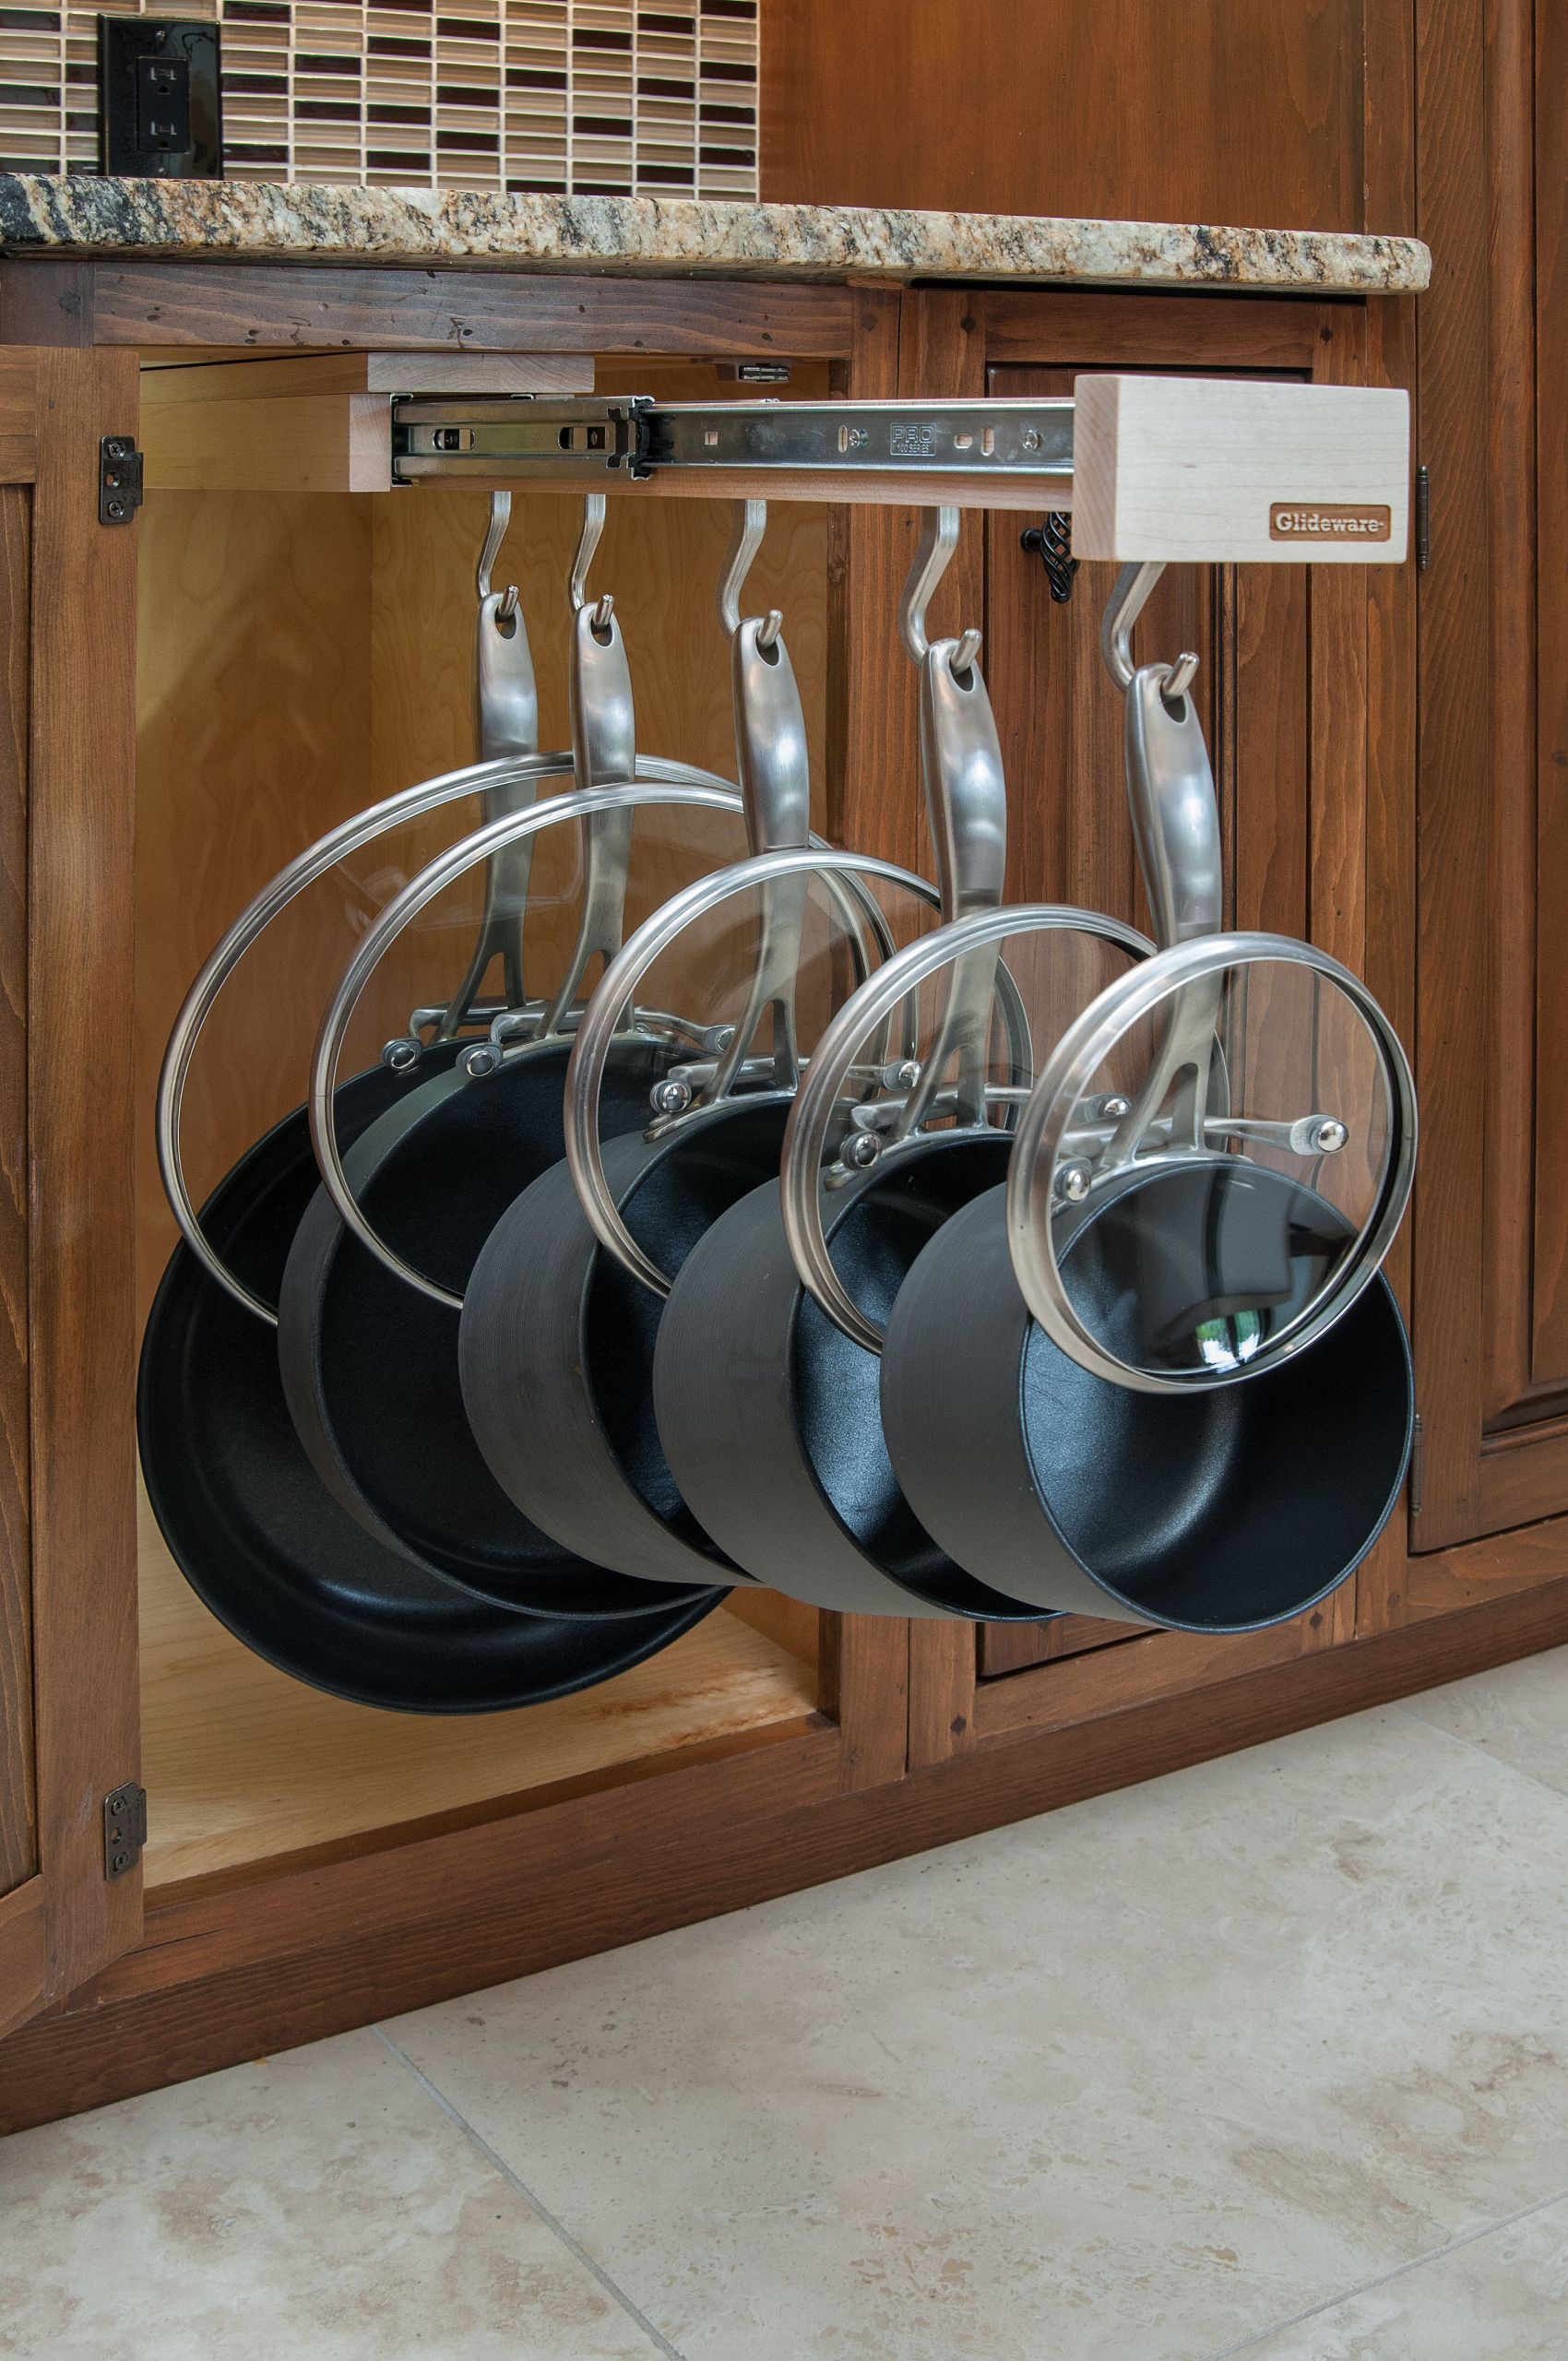 Pots And Pans Organizer DIY
 Great way to organize your pots pans